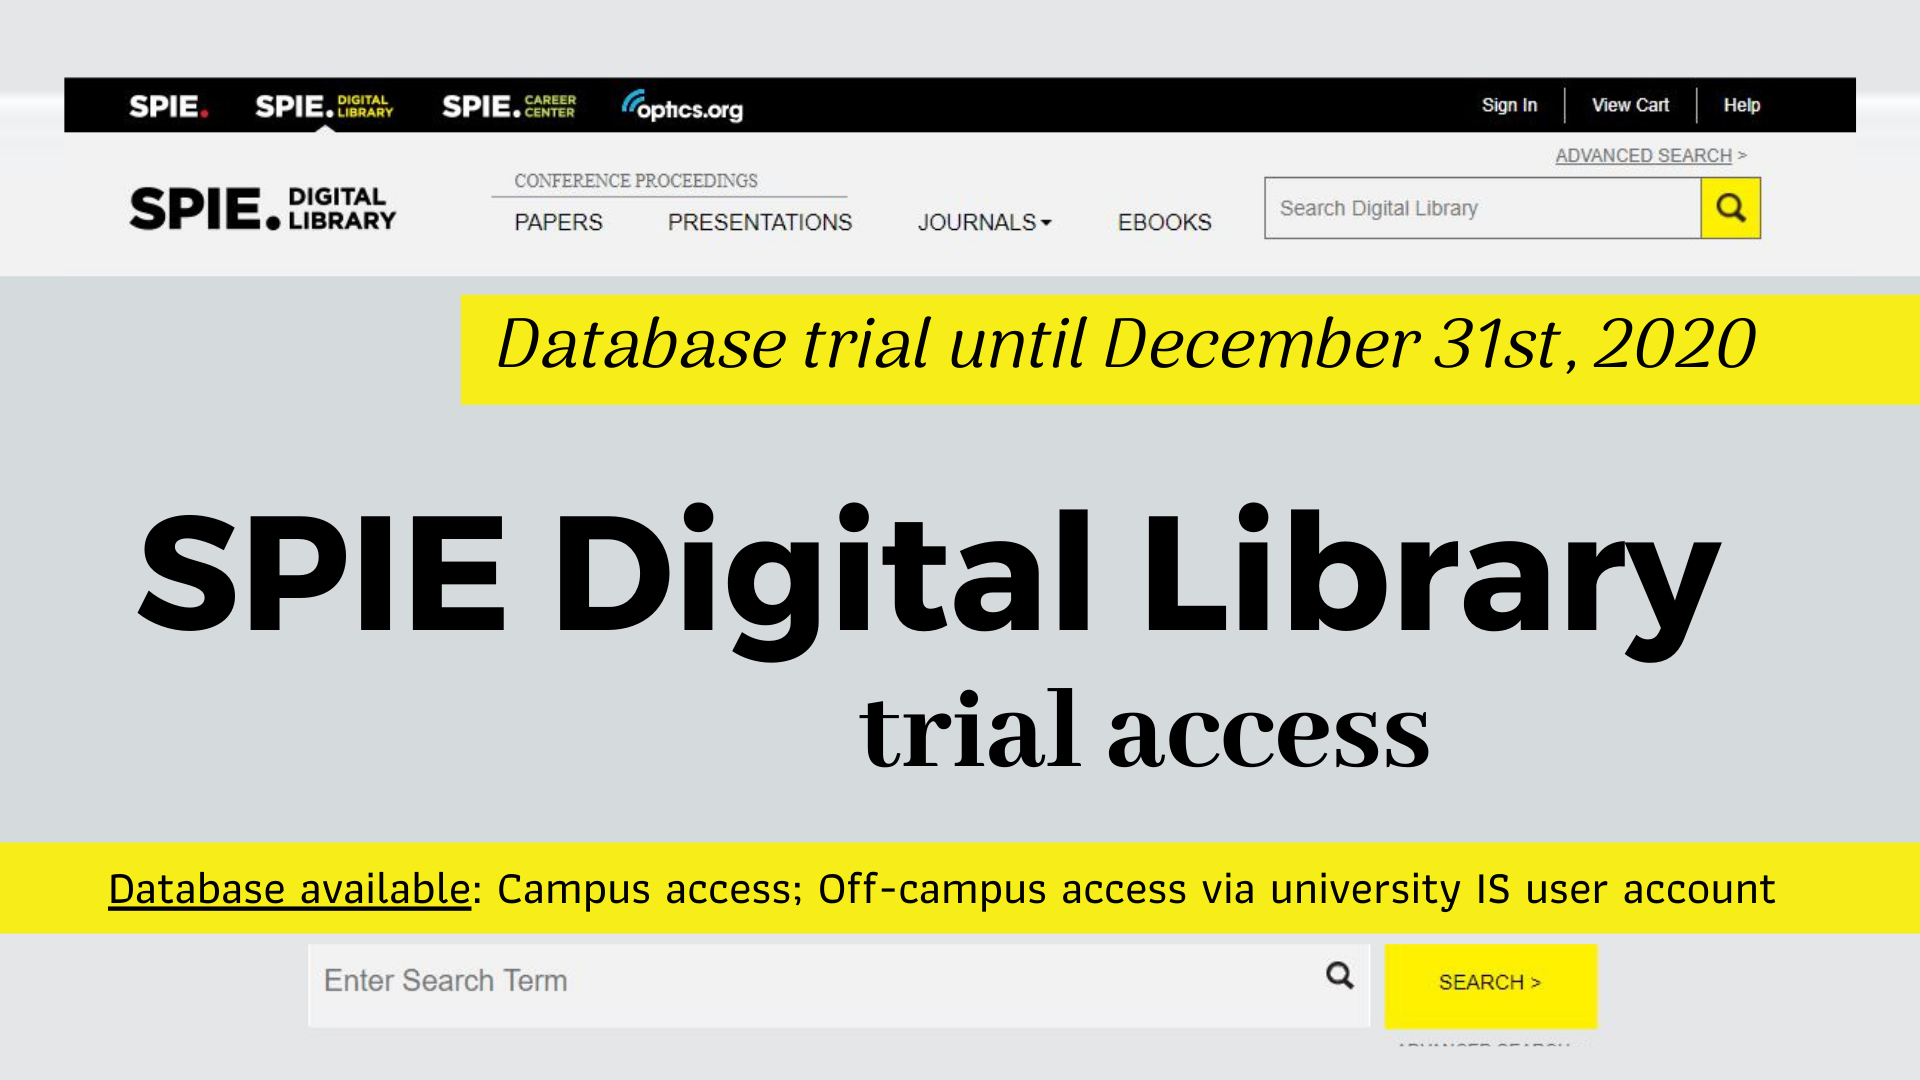 SPIE Digital Library trial access until December 31st, 2020  The SPIE Digital Library trial includes access to the world’s largest collection of optics and photonics applied research:  473,000+ proceedings papers from SPIE conferences 29,000+ presentation recording videos of research presented at SPIE conferences 36,000+ journal papers from 11 SPIE journals 420+ eBooks Database available:  Off-campus access via university IS user account: https://ezproxy.llu.lv/login?url=https://www.spiedigitallibrary.org Campus access: https://spiedigitallibrary.org